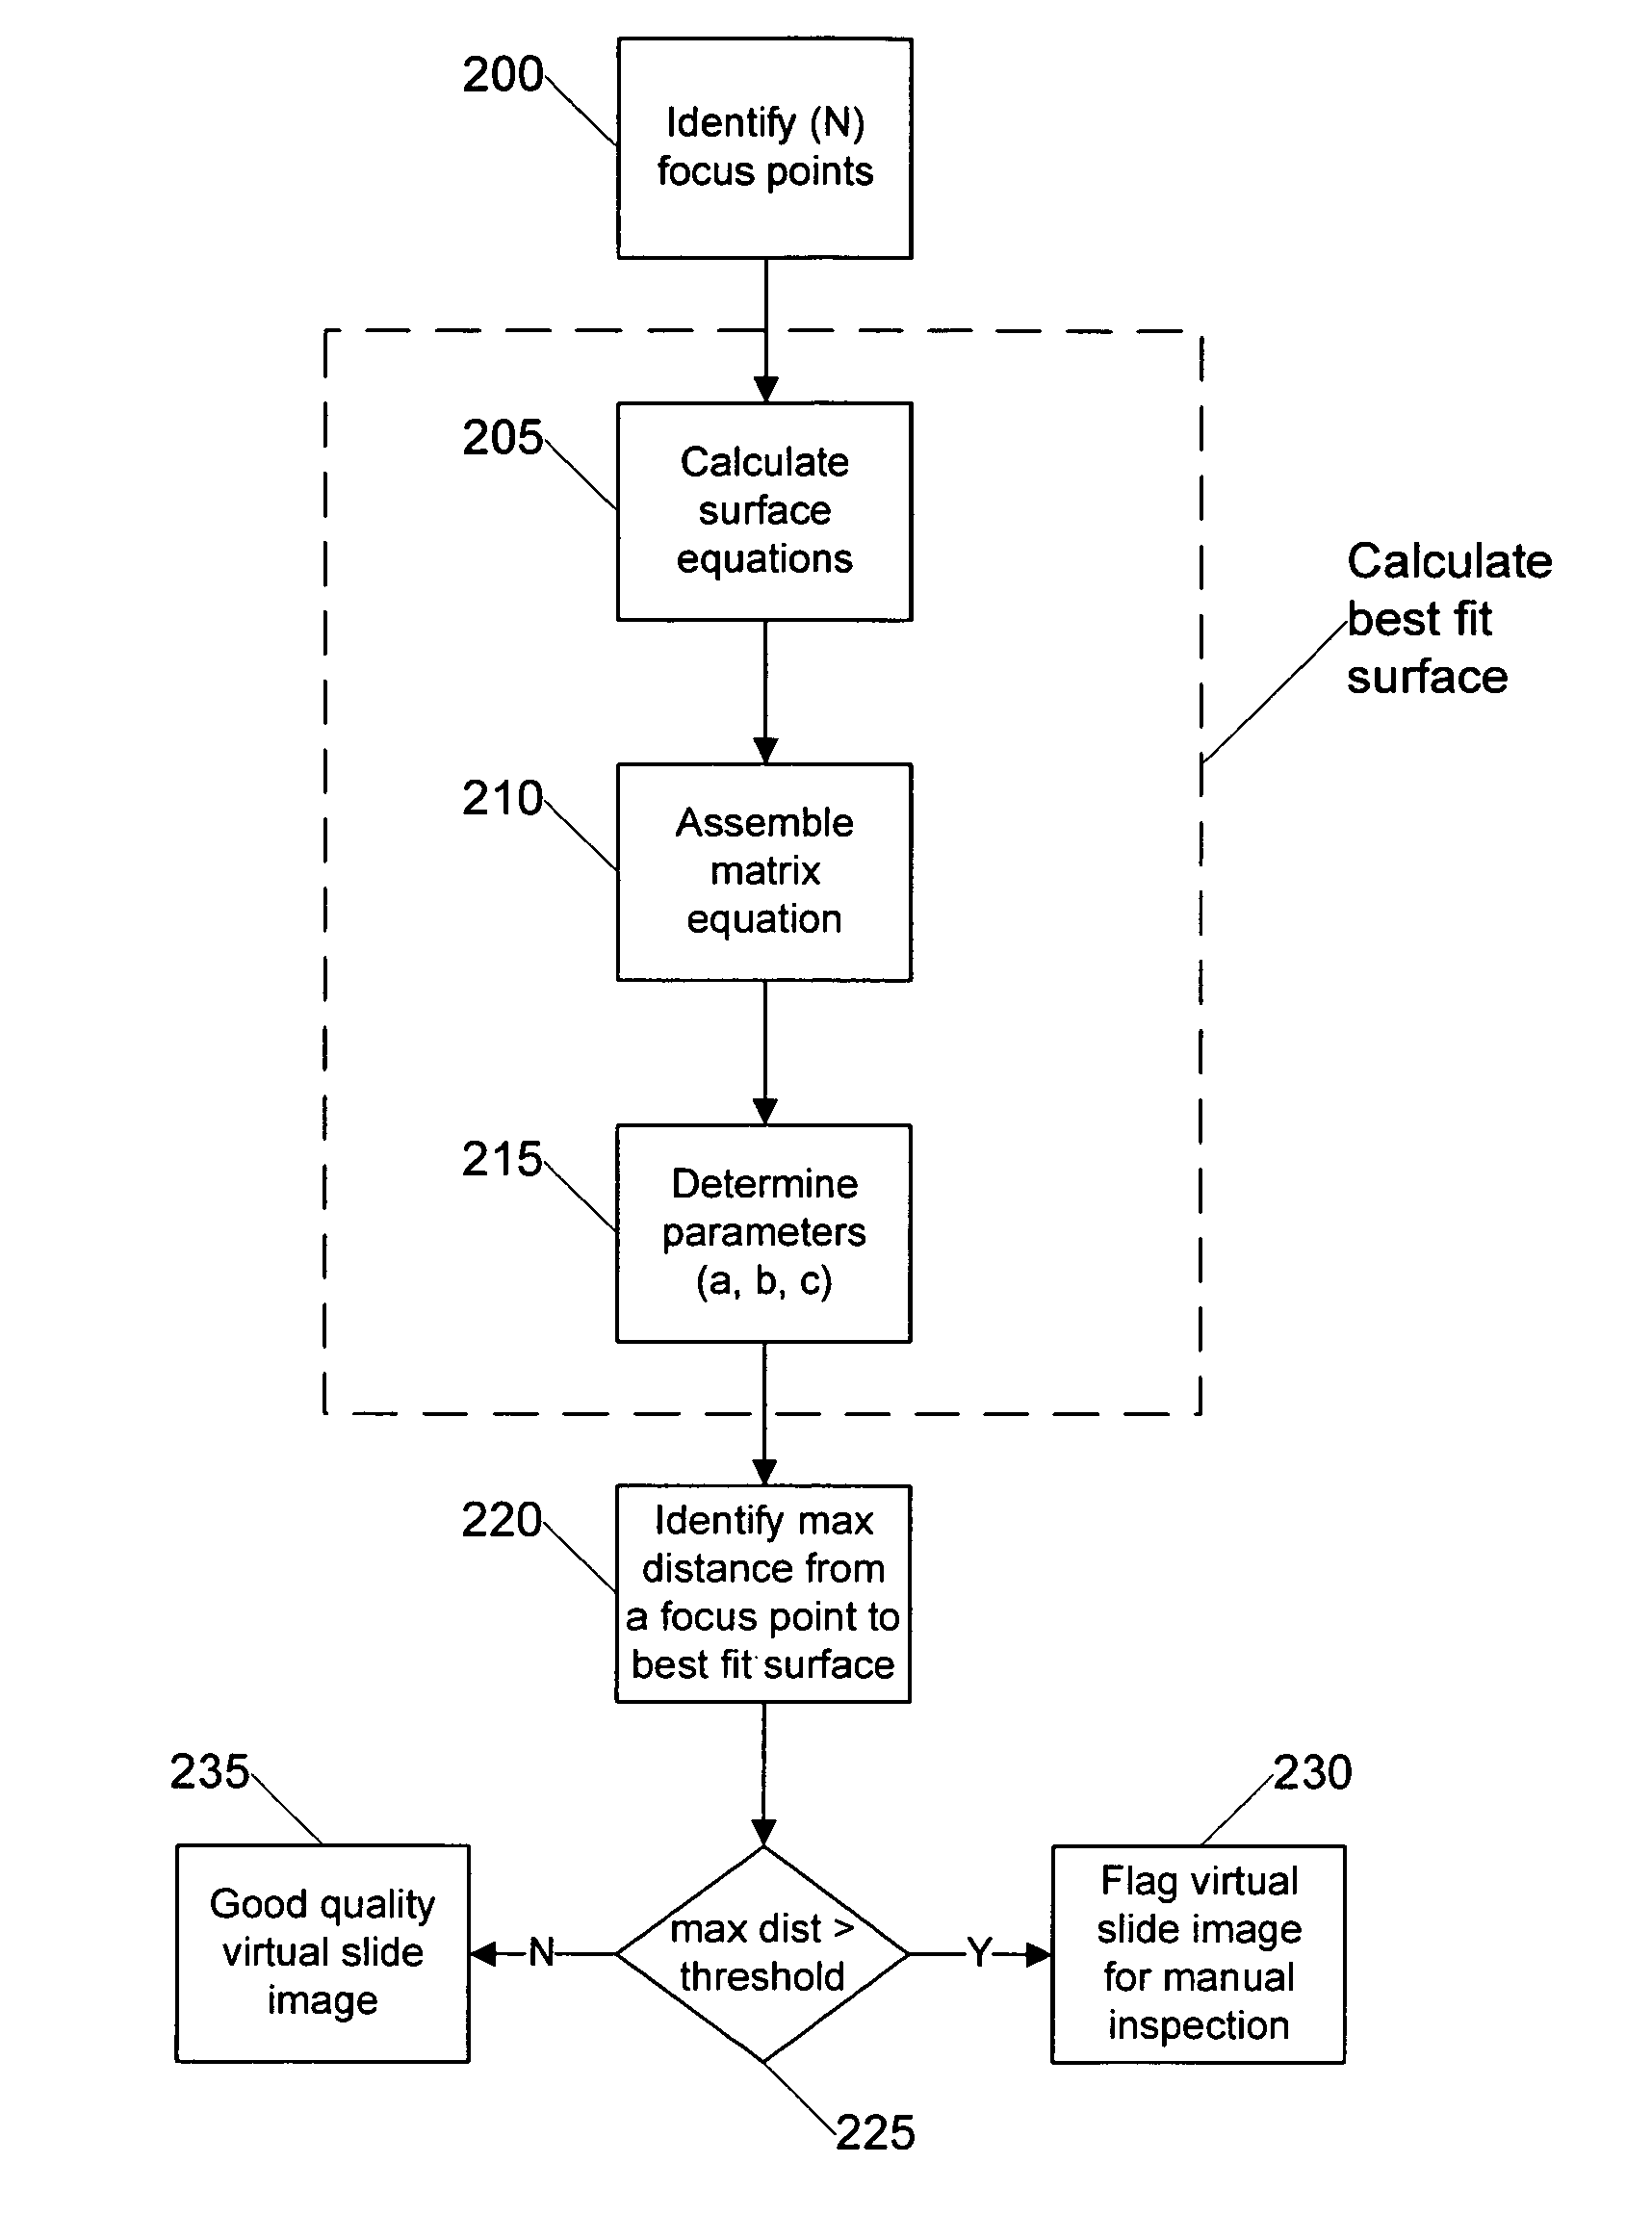 System and method for assessing virtual slide image quality